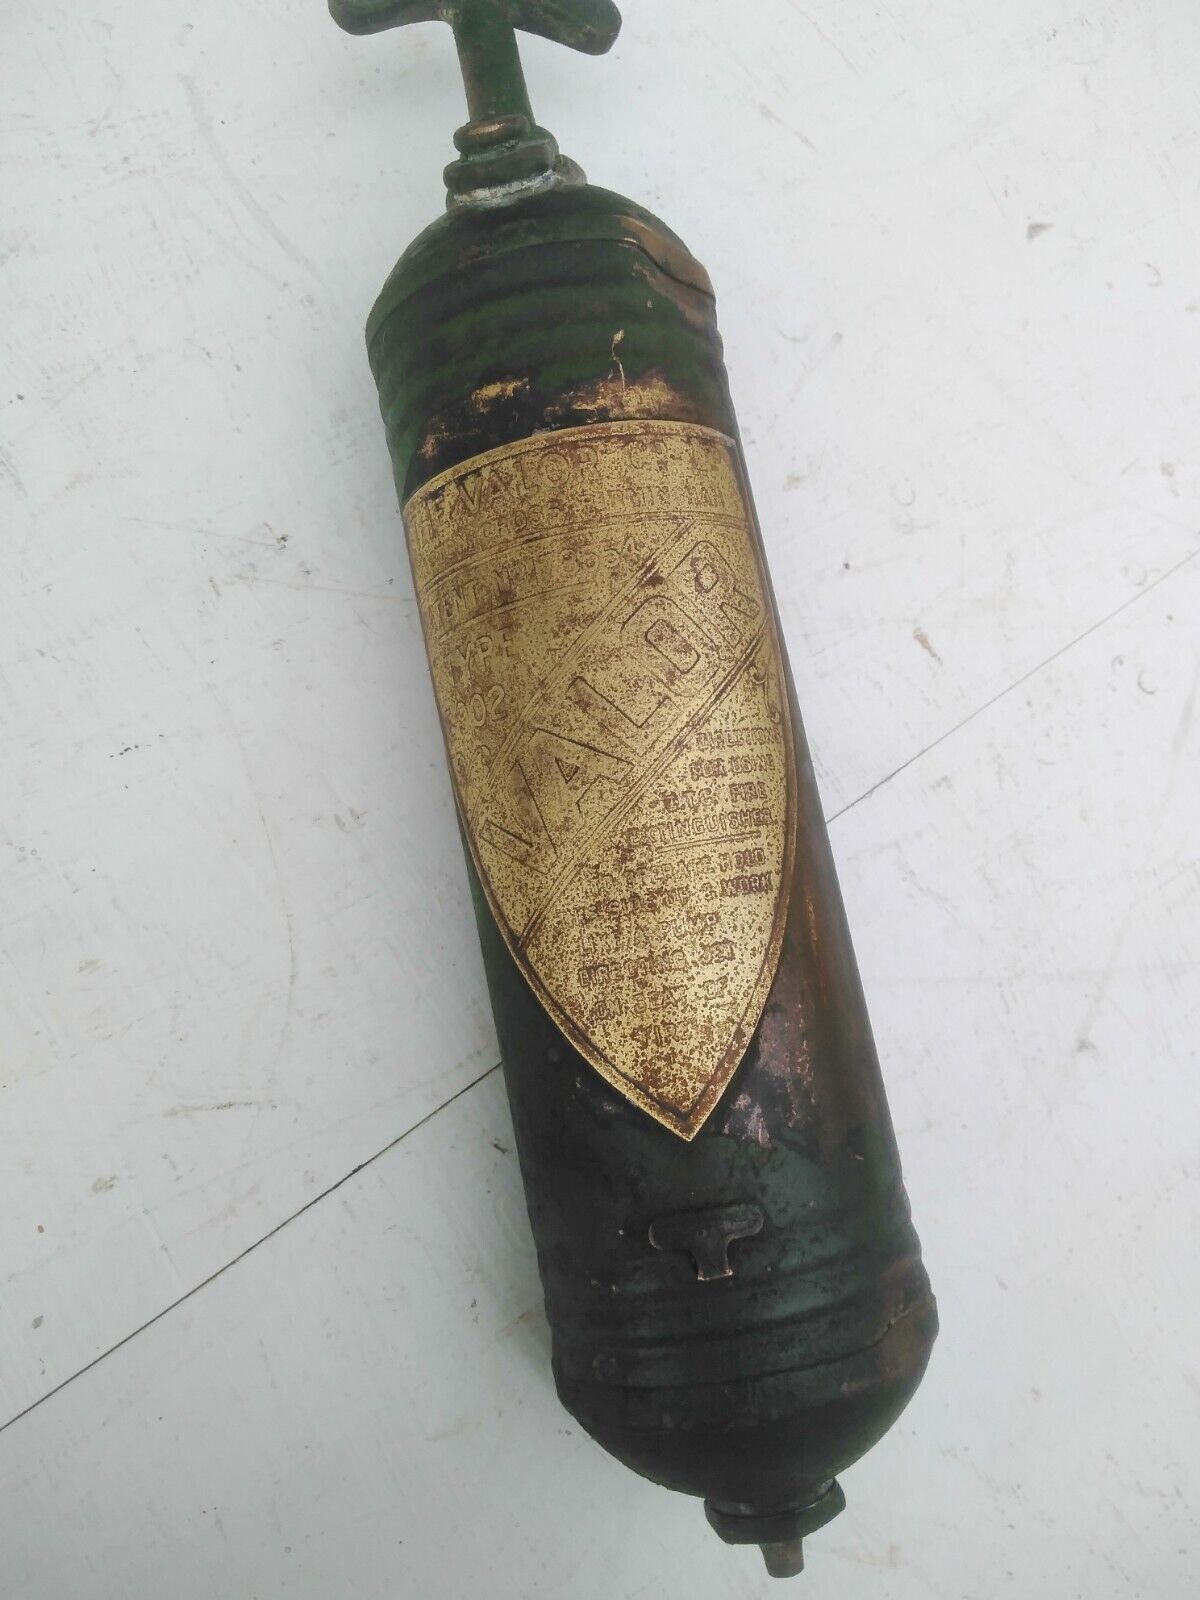 VINTAGE VALOR TYPE E902 FIRE EXTINGUISHER LARGE BRASS SHIELD ON FRONT POSS ARMY